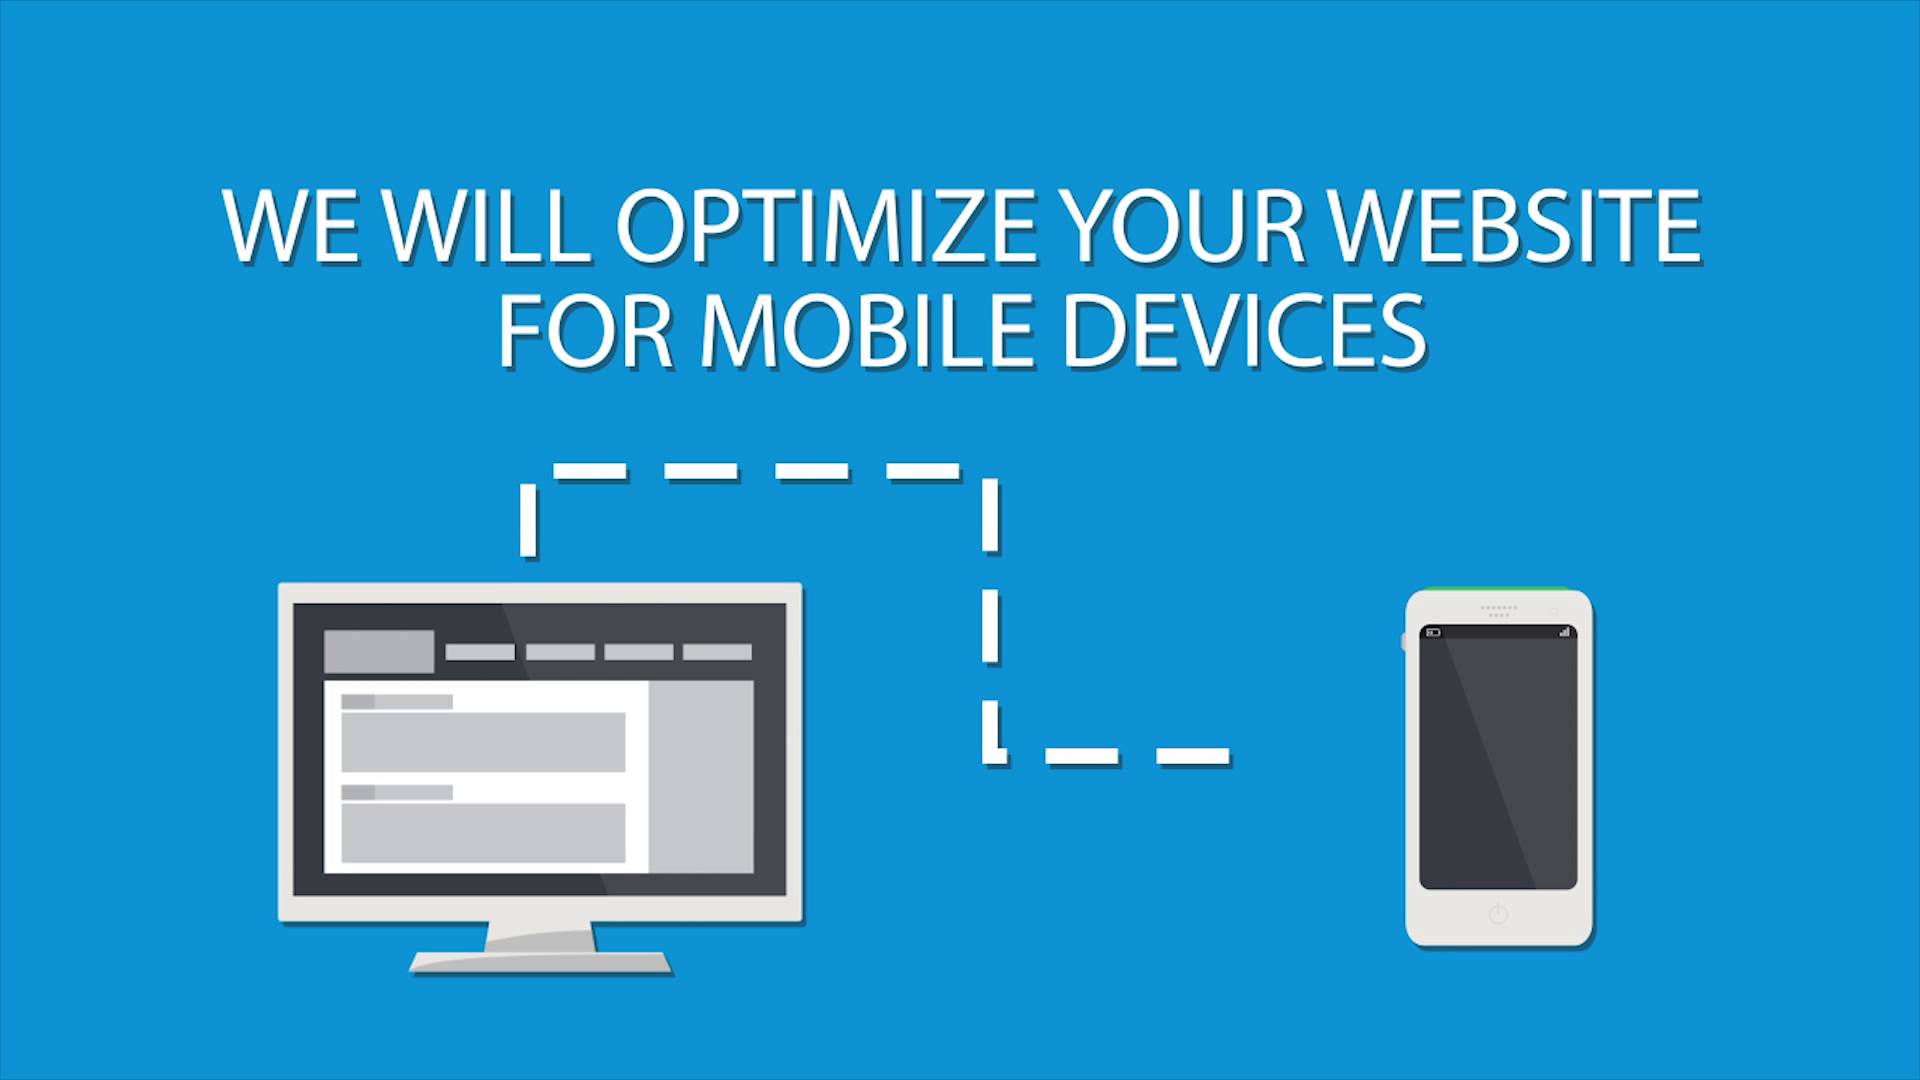 Do you have a mobile-friendly website?